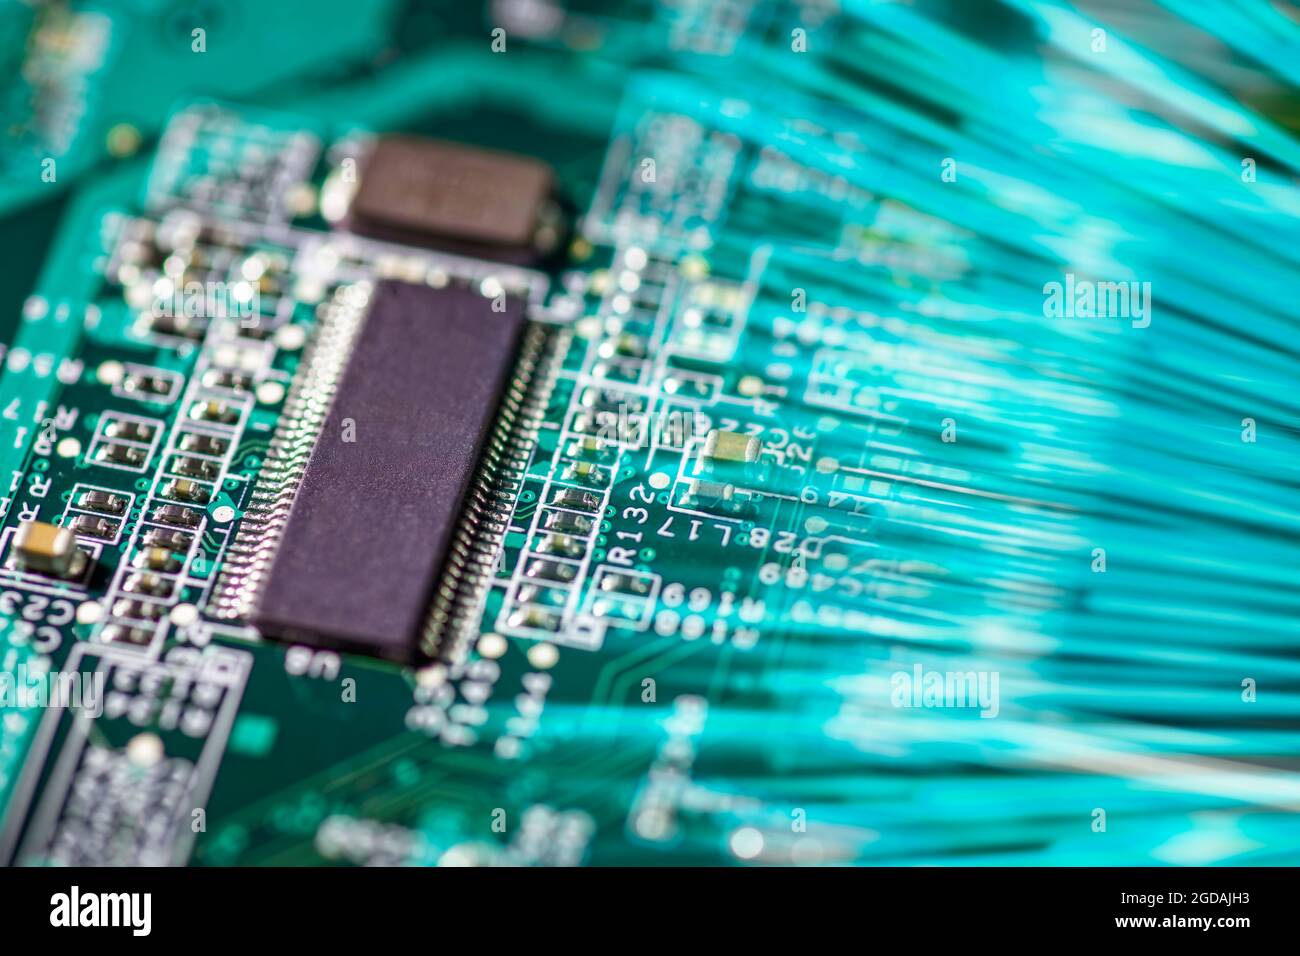 Computer board with processor and motion blur Stock Photo